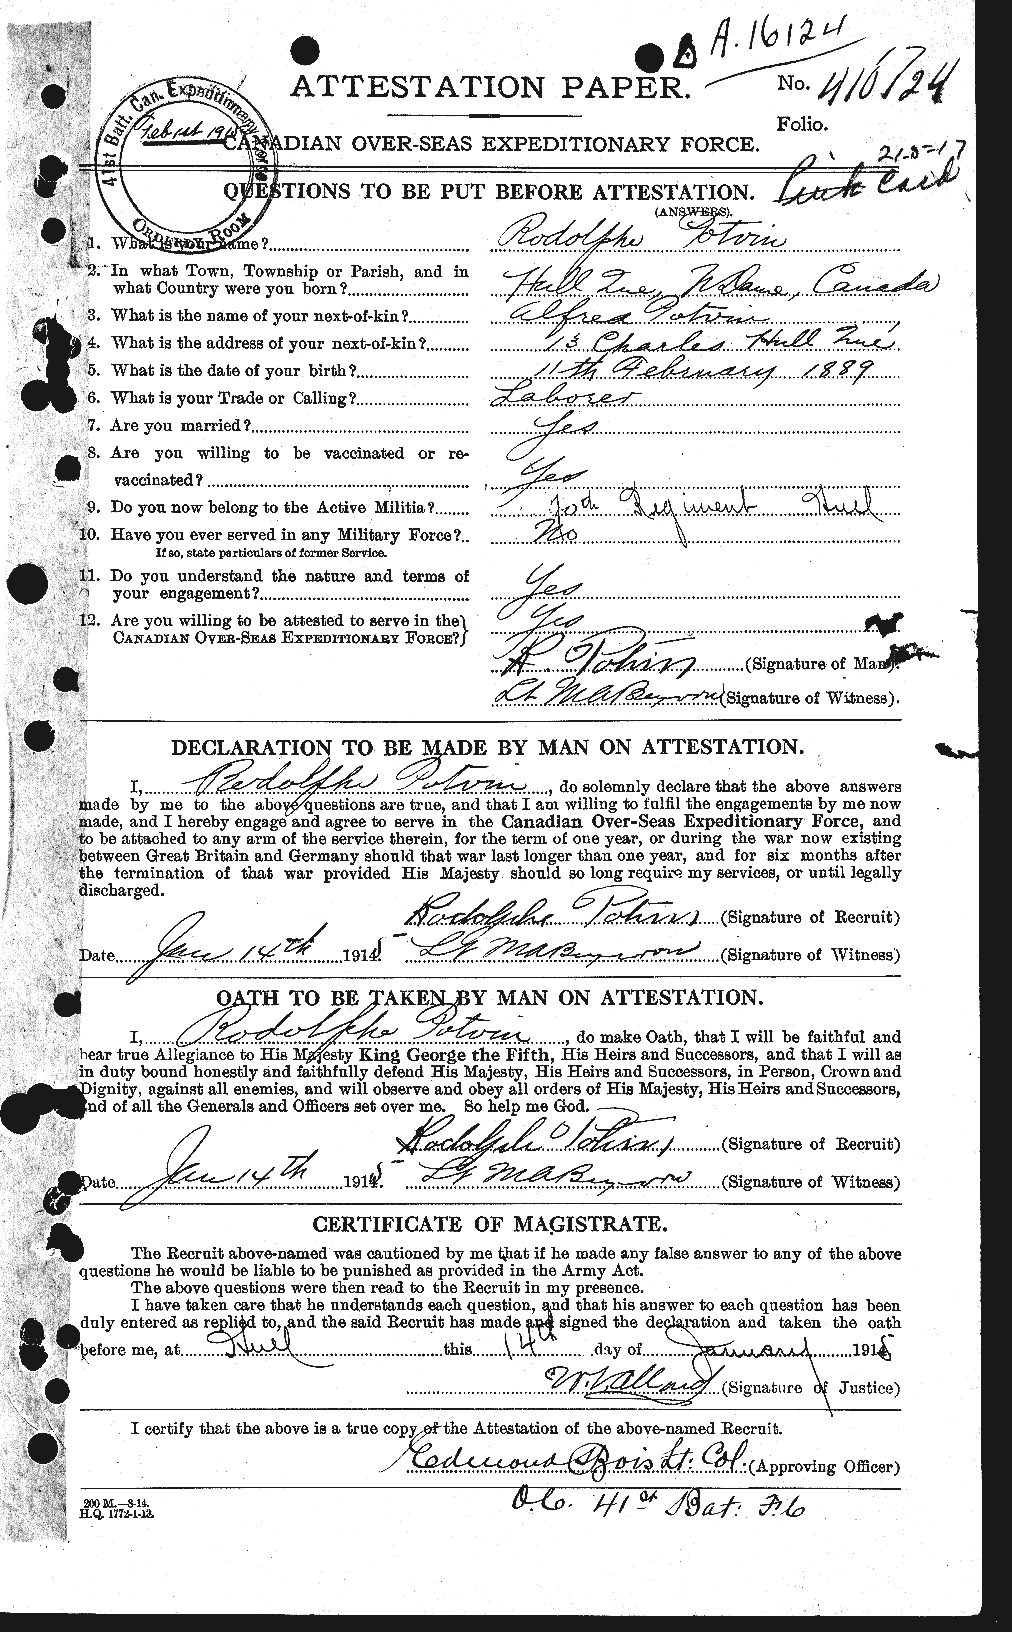 Personnel Records of the First World War - CEF 584666a